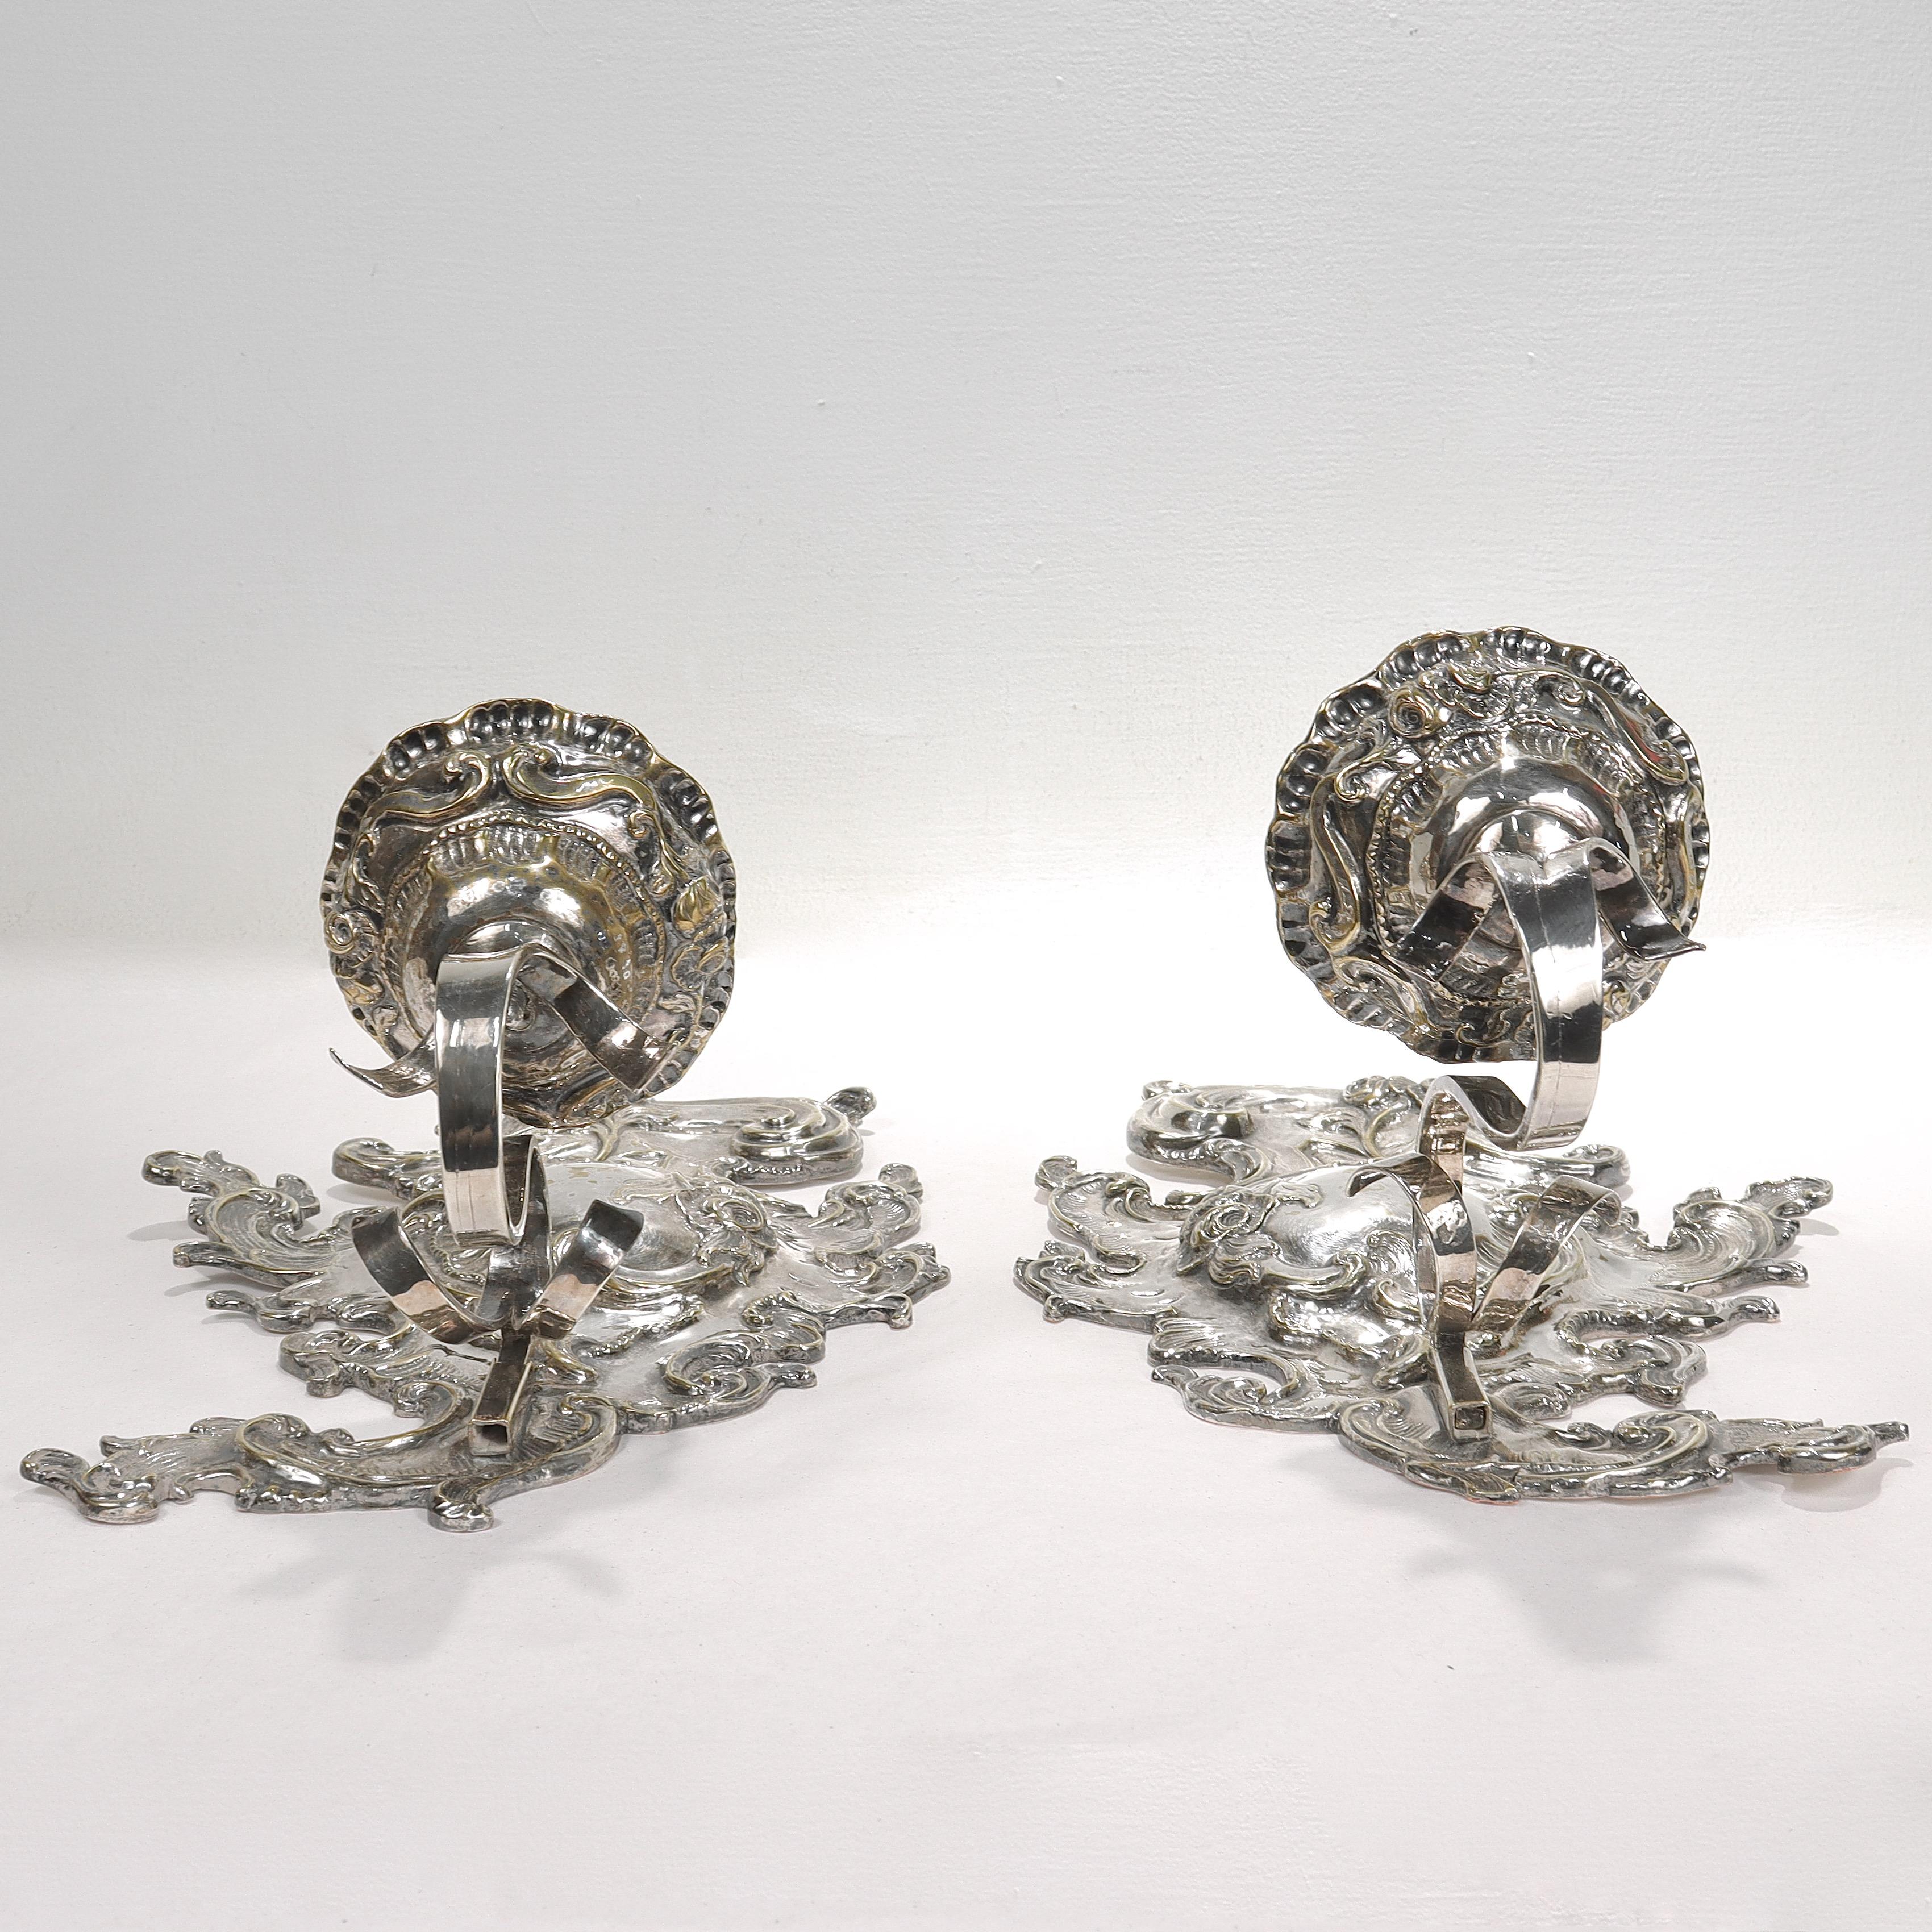 Antique Rococo or Rococo Revival Silver Plated Wall Sconces For Sale 7